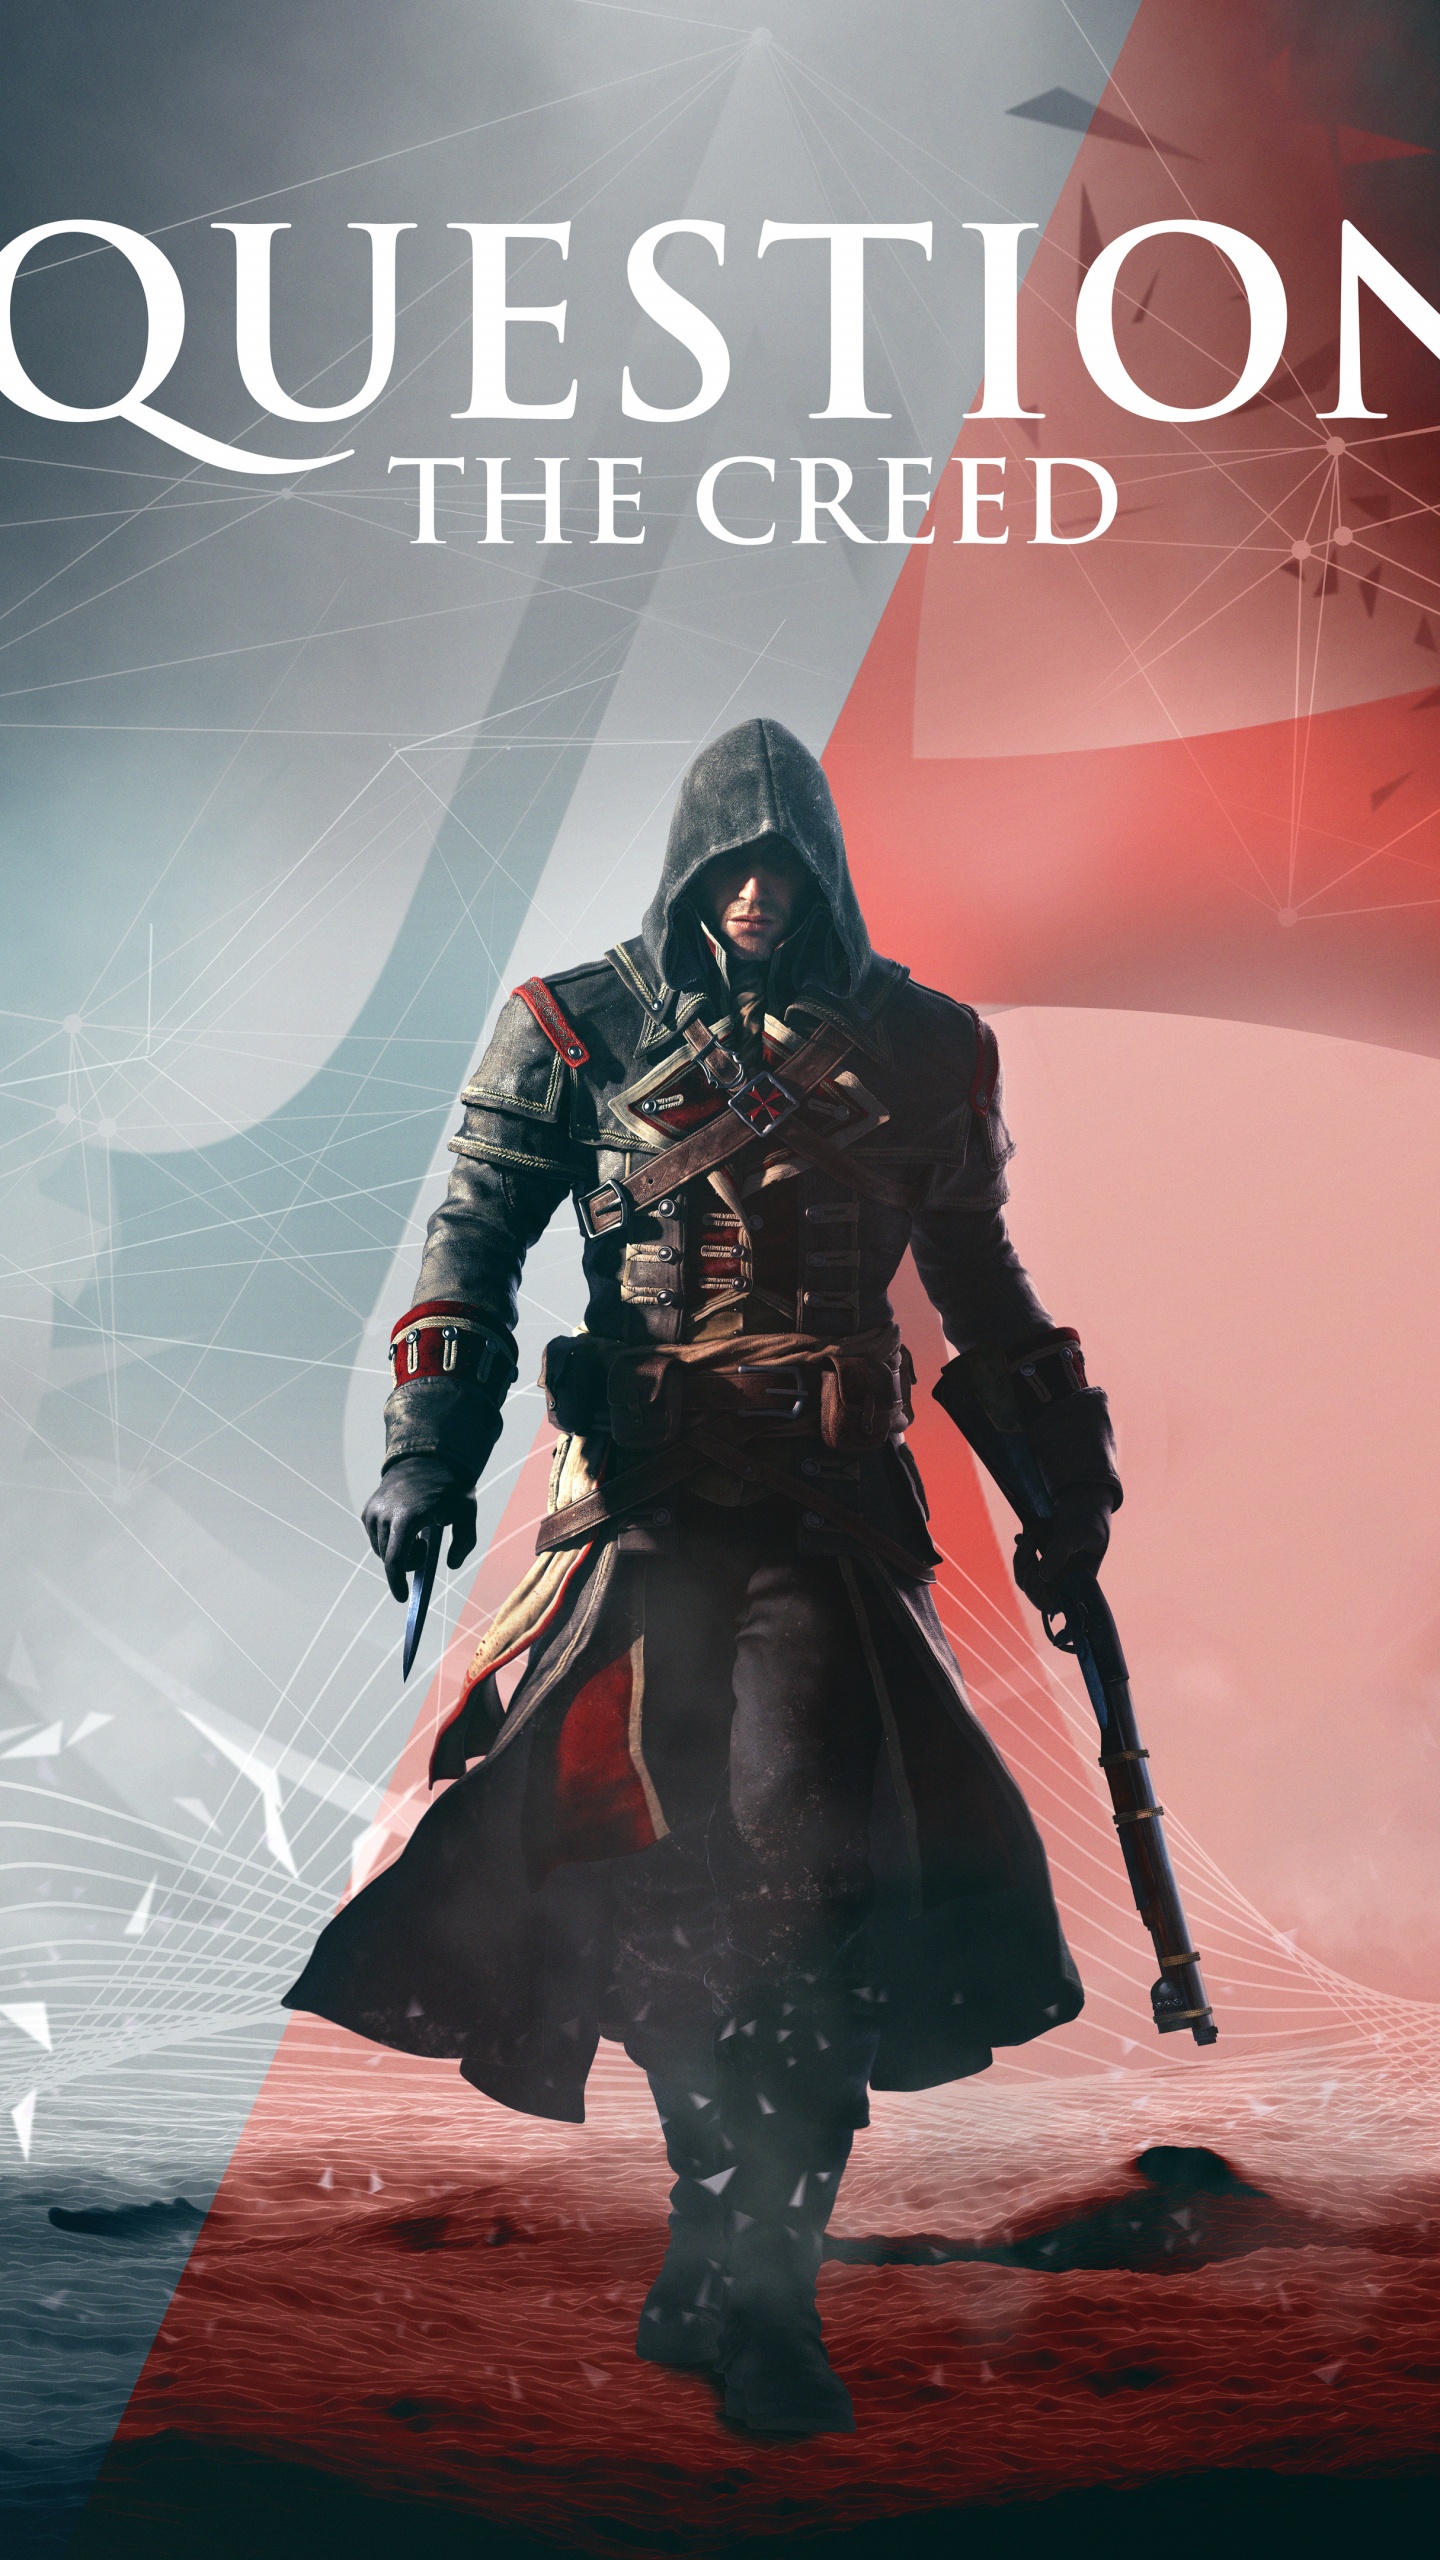 Assassins Creed Rogue, Assassins Creed Unity, Assassins Creed, Assassins Creed Brotherhood, Adventure. Wallpaper in 1440x2560 Resolution